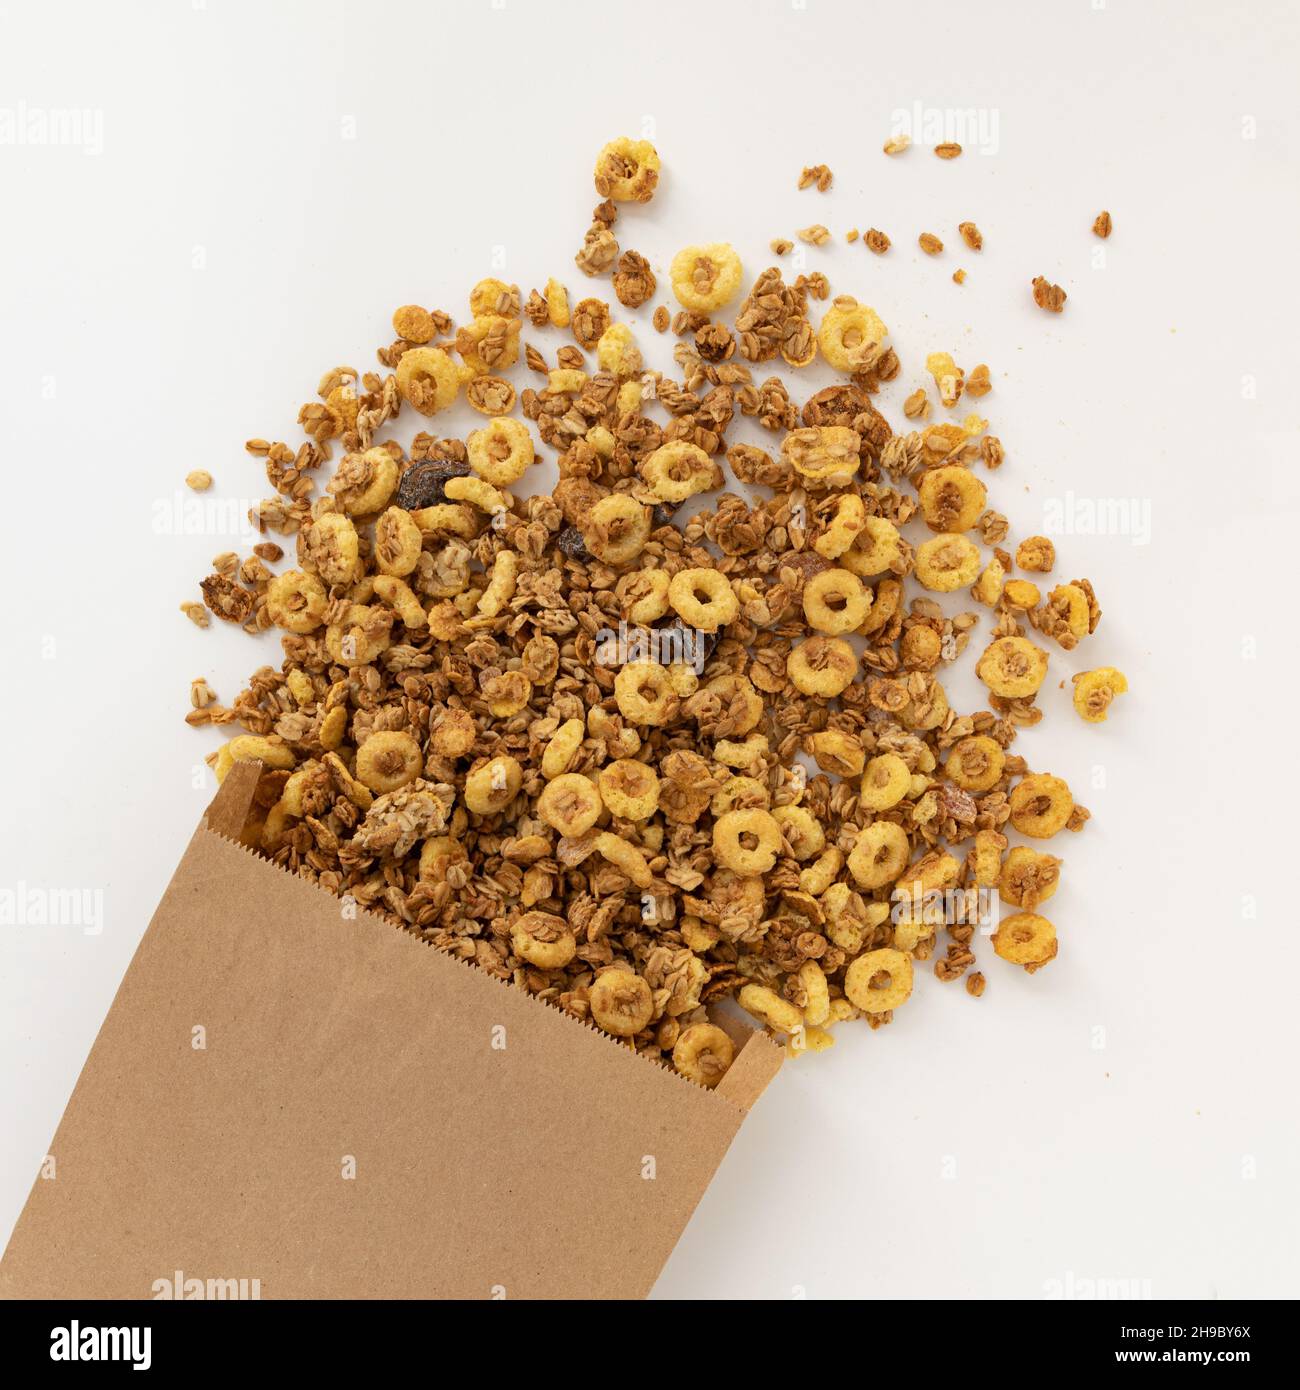 crunchy granola for breakfast, tasty granola poured out of paper bag isolated on white background, concept healthy food Stock Photo